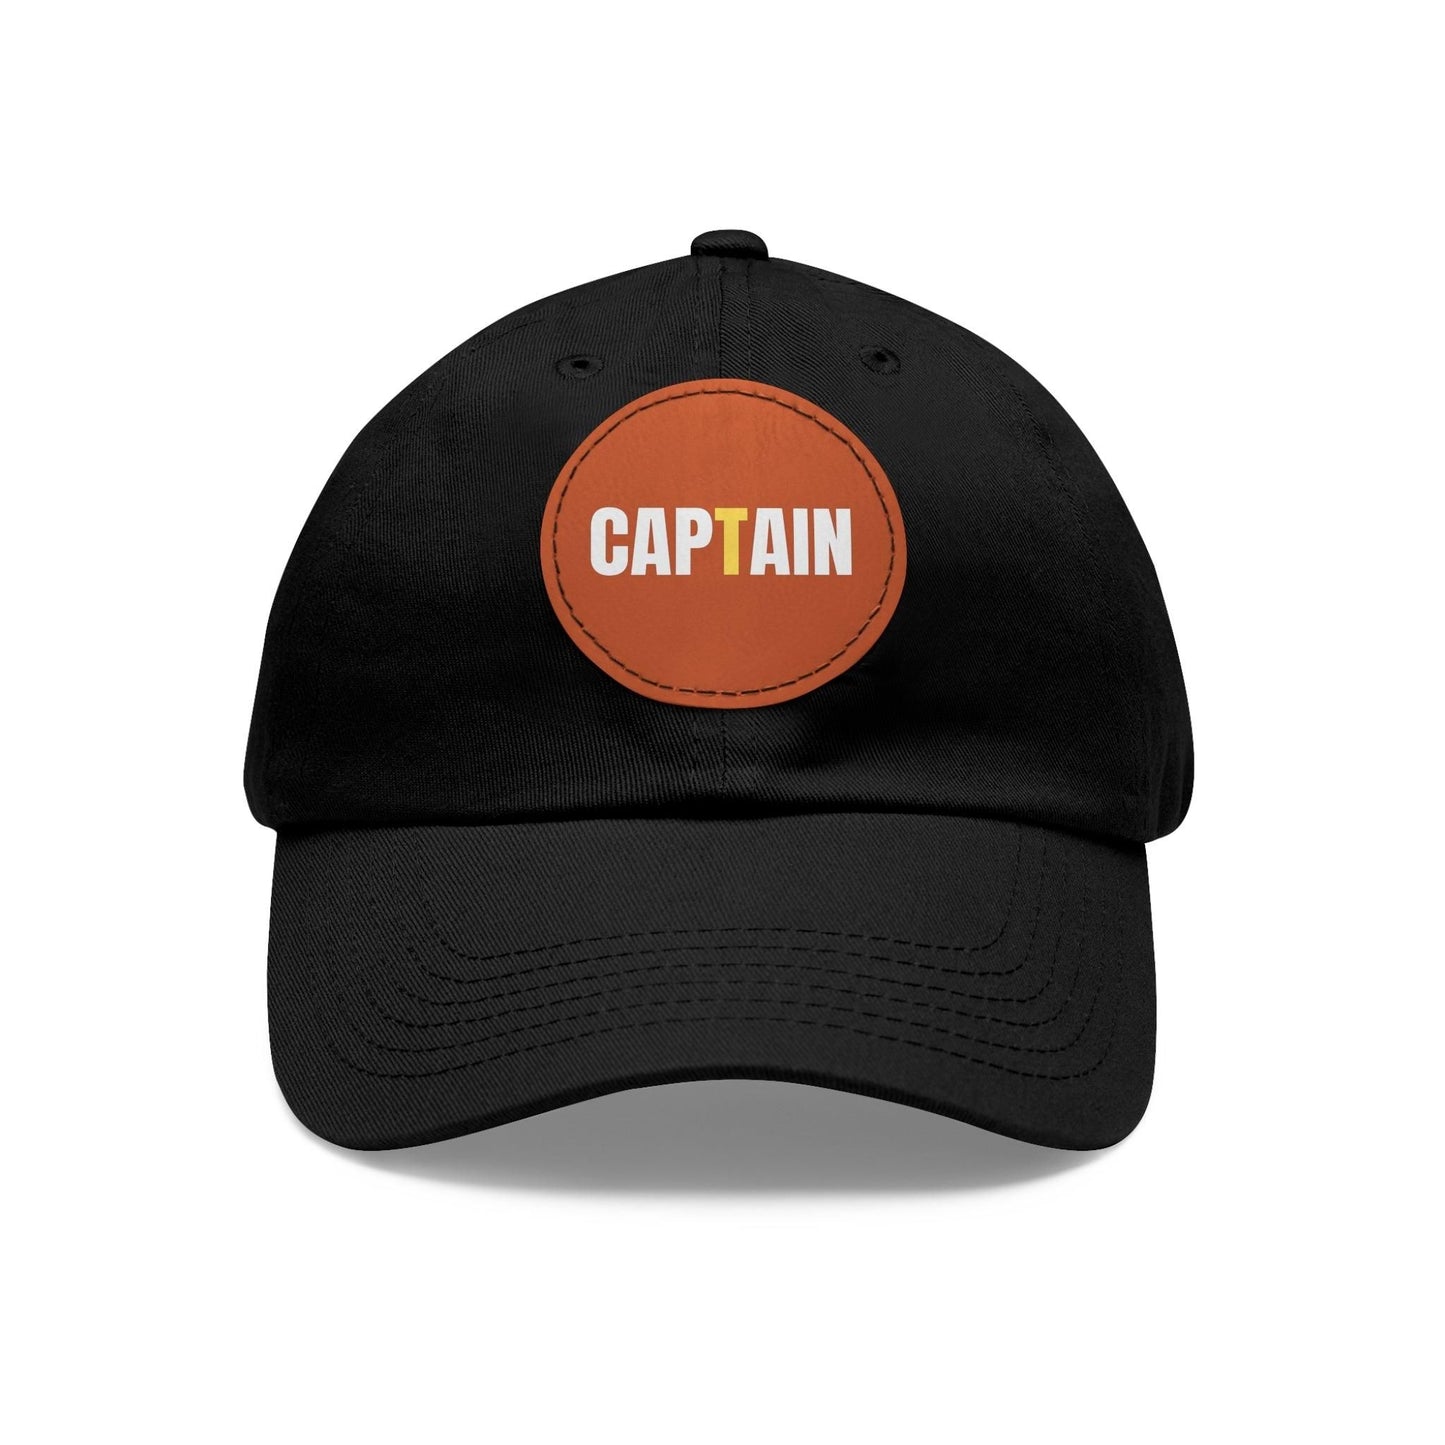 Captain Baseball Hat with Leather Patch Cap Black / Light Brown Circle One size